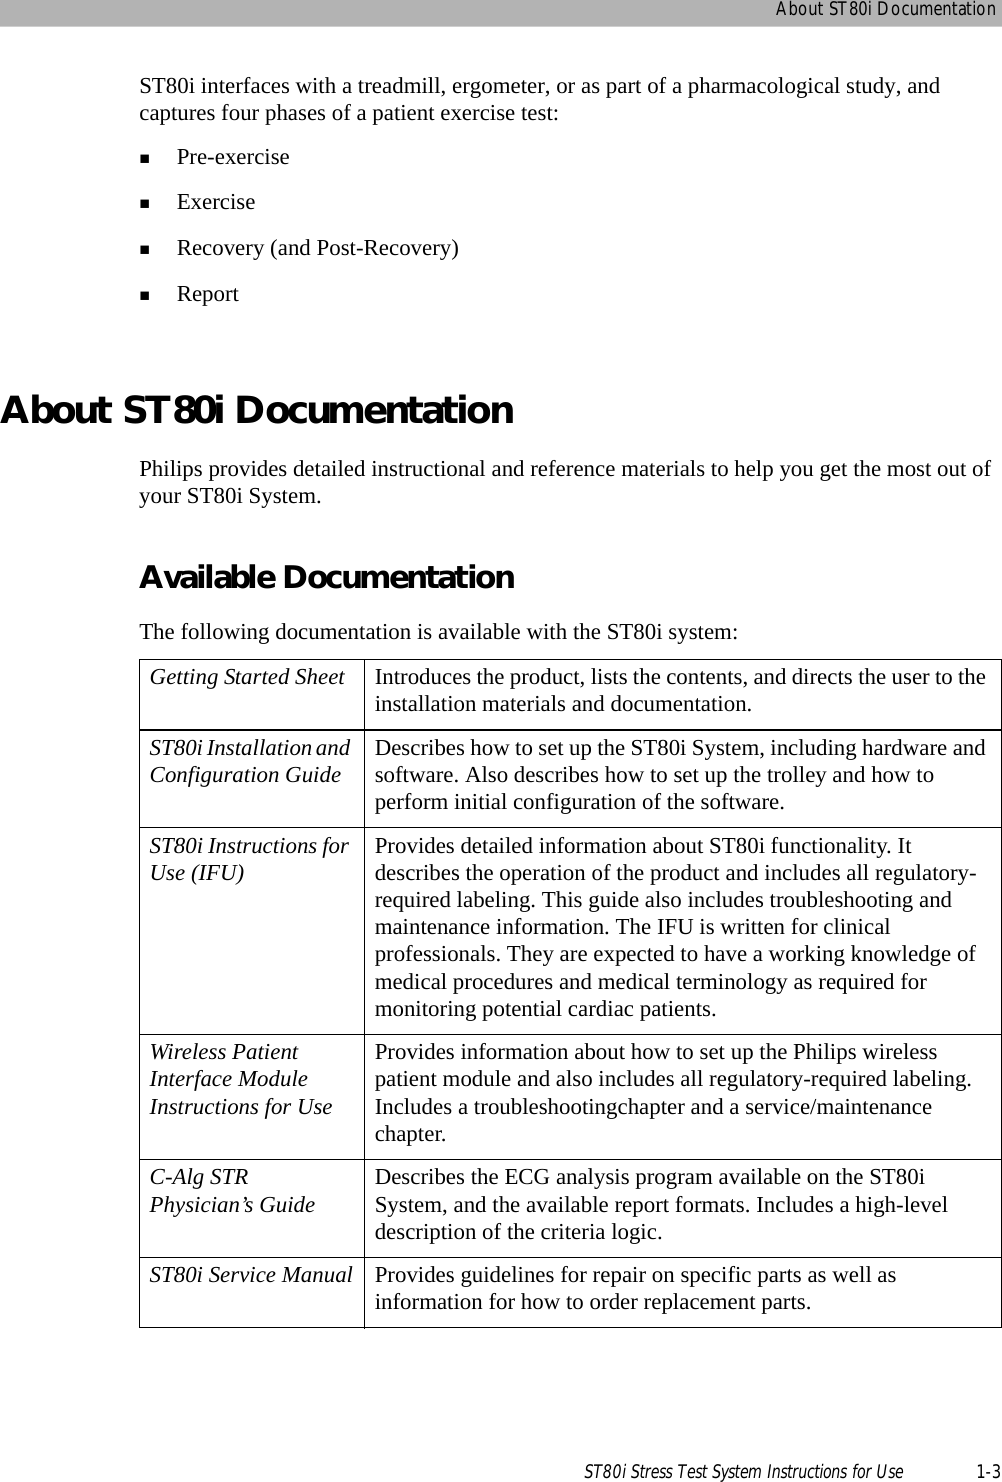 About ST80i DocumentationST80i Stress Test System Instructions for Use 1-3ST80i interfaces with a treadmill, ergometer, or as part of a pharmacological study, and captures four phases of a patient exercise test:Pre-exerciseExerciseRecovery (and Post-Recovery)ReportAbout ST80i DocumentationPhilips provides detailed instructional and reference materials to help you get the most out of your ST80i System.Available DocumentationThe following documentation is available with the ST80i system:Getting Started Sheet Introduces the product, lists the contents, and directs the user to the installation materials and documentation.ST80i Installation and Configuration Guide Describes how to set up the ST80i System, including hardware and software. Also describes how to set up the trolley and how to perform initial configuration of the software.ST80i Instructions for Use (IFU) Provides detailed information about ST80i functionality. It describes the operation of the product and includes all regulatory-required labeling. This guide also includes troubleshooting and maintenance information. The IFU is written for clinical professionals. They are expected to have a working knowledge of medical procedures and medical terminology as required for monitoring potential cardiac patients.Wireless Patient Interface Module Instructions for UseProvides information about how to set up the Philips wireless patient module and also includes all regulatory-required labeling. Includes a troubleshootingchapter and a service/maintenance chapter.C-Alg STR Physician’s Guide Describes the ECG analysis program available on the ST80i System, and the available report formats. Includes a high-level description of the criteria logic.ST80i Service Manual Provides guidelines for repair on specific parts as well as information for how to order replacement parts.